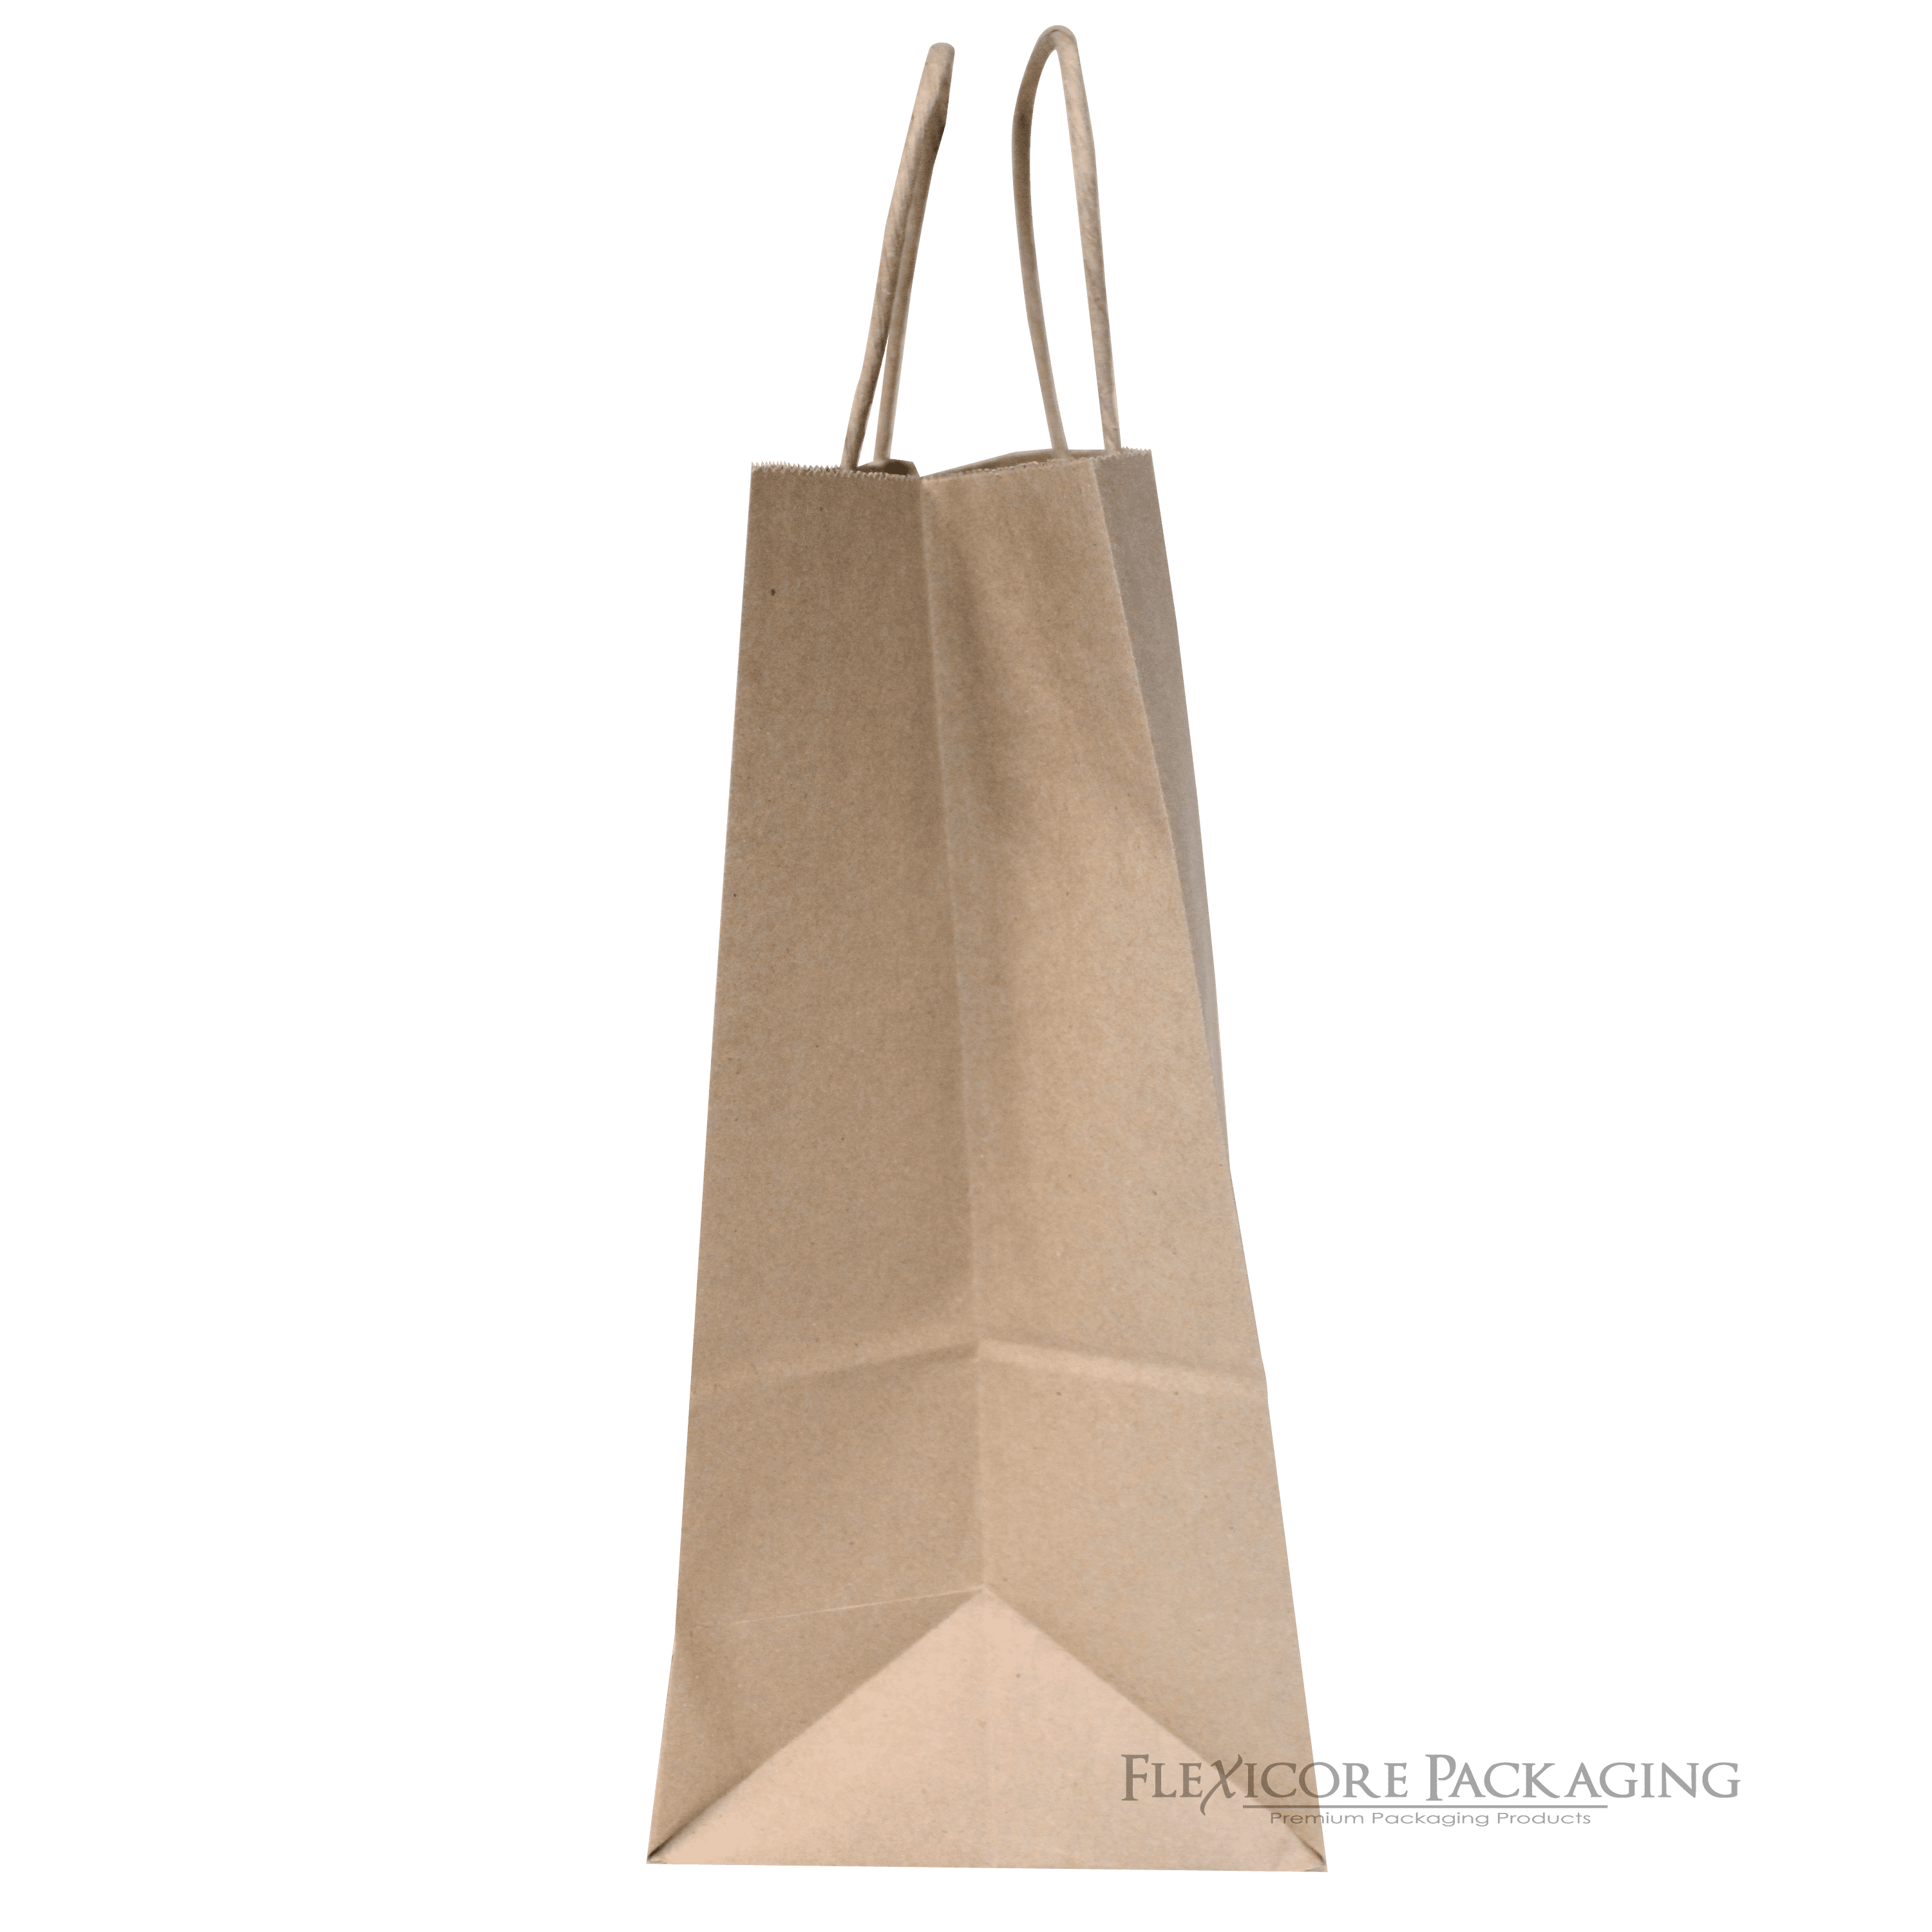 Paper Bags Bulk Containers Various Sizes CROSS Ground Floor Bags Carrier Bags Brown